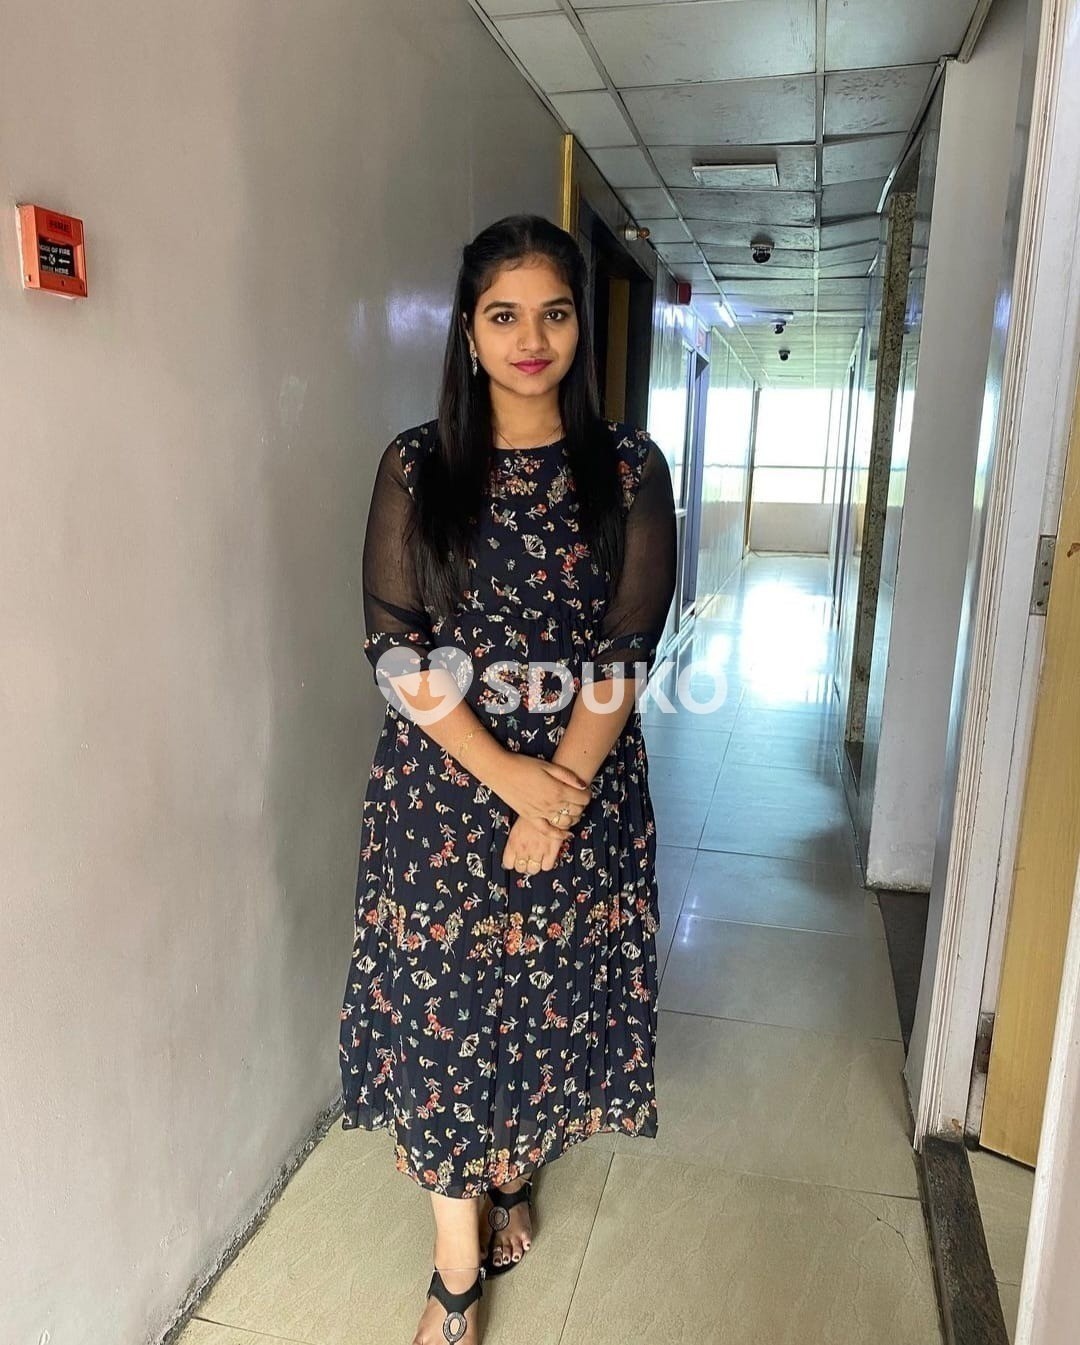 Thane Mumbai Full satisfied independent call Girl 24 hours available